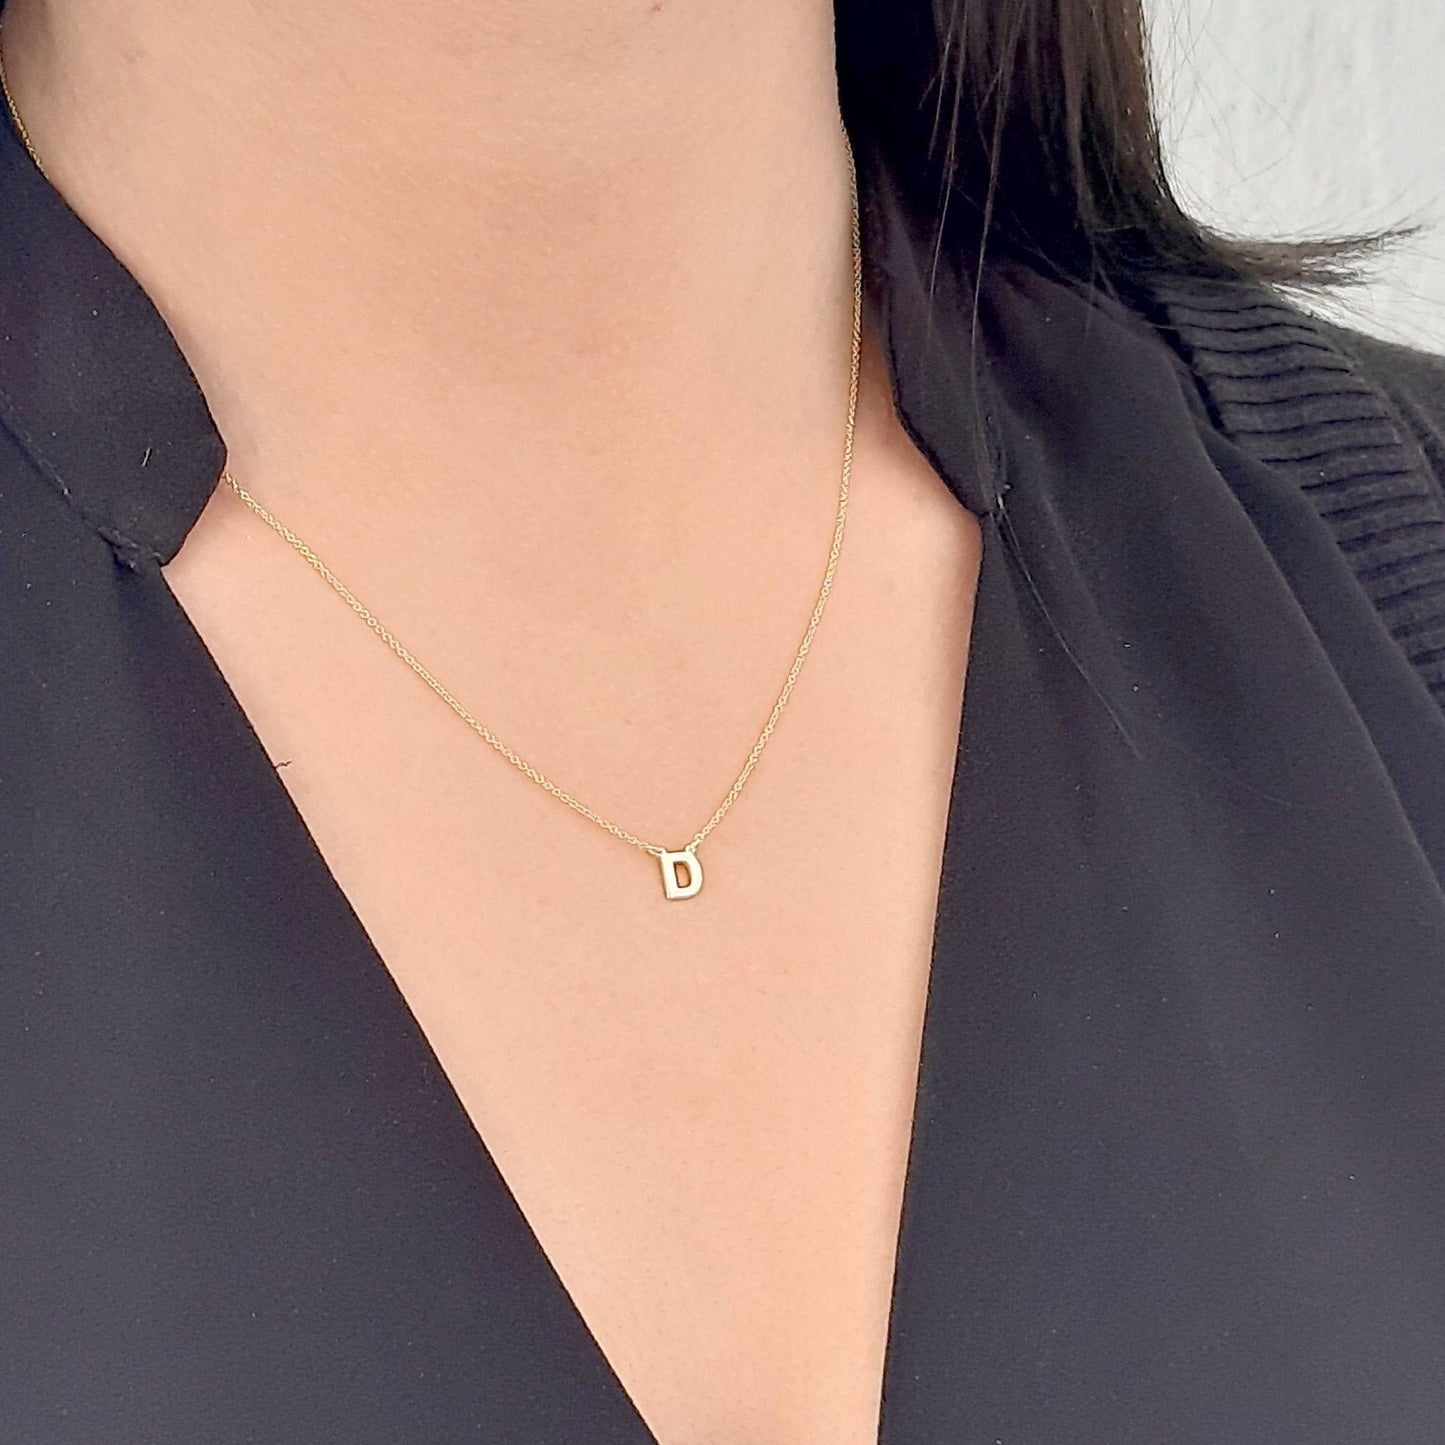 Initial Gold Necklace, 14k Solid Gold Necklace, Gift Necklace, Sideways Necklace, Sideways Letter Necklace, Dainty Necklace layered necklace